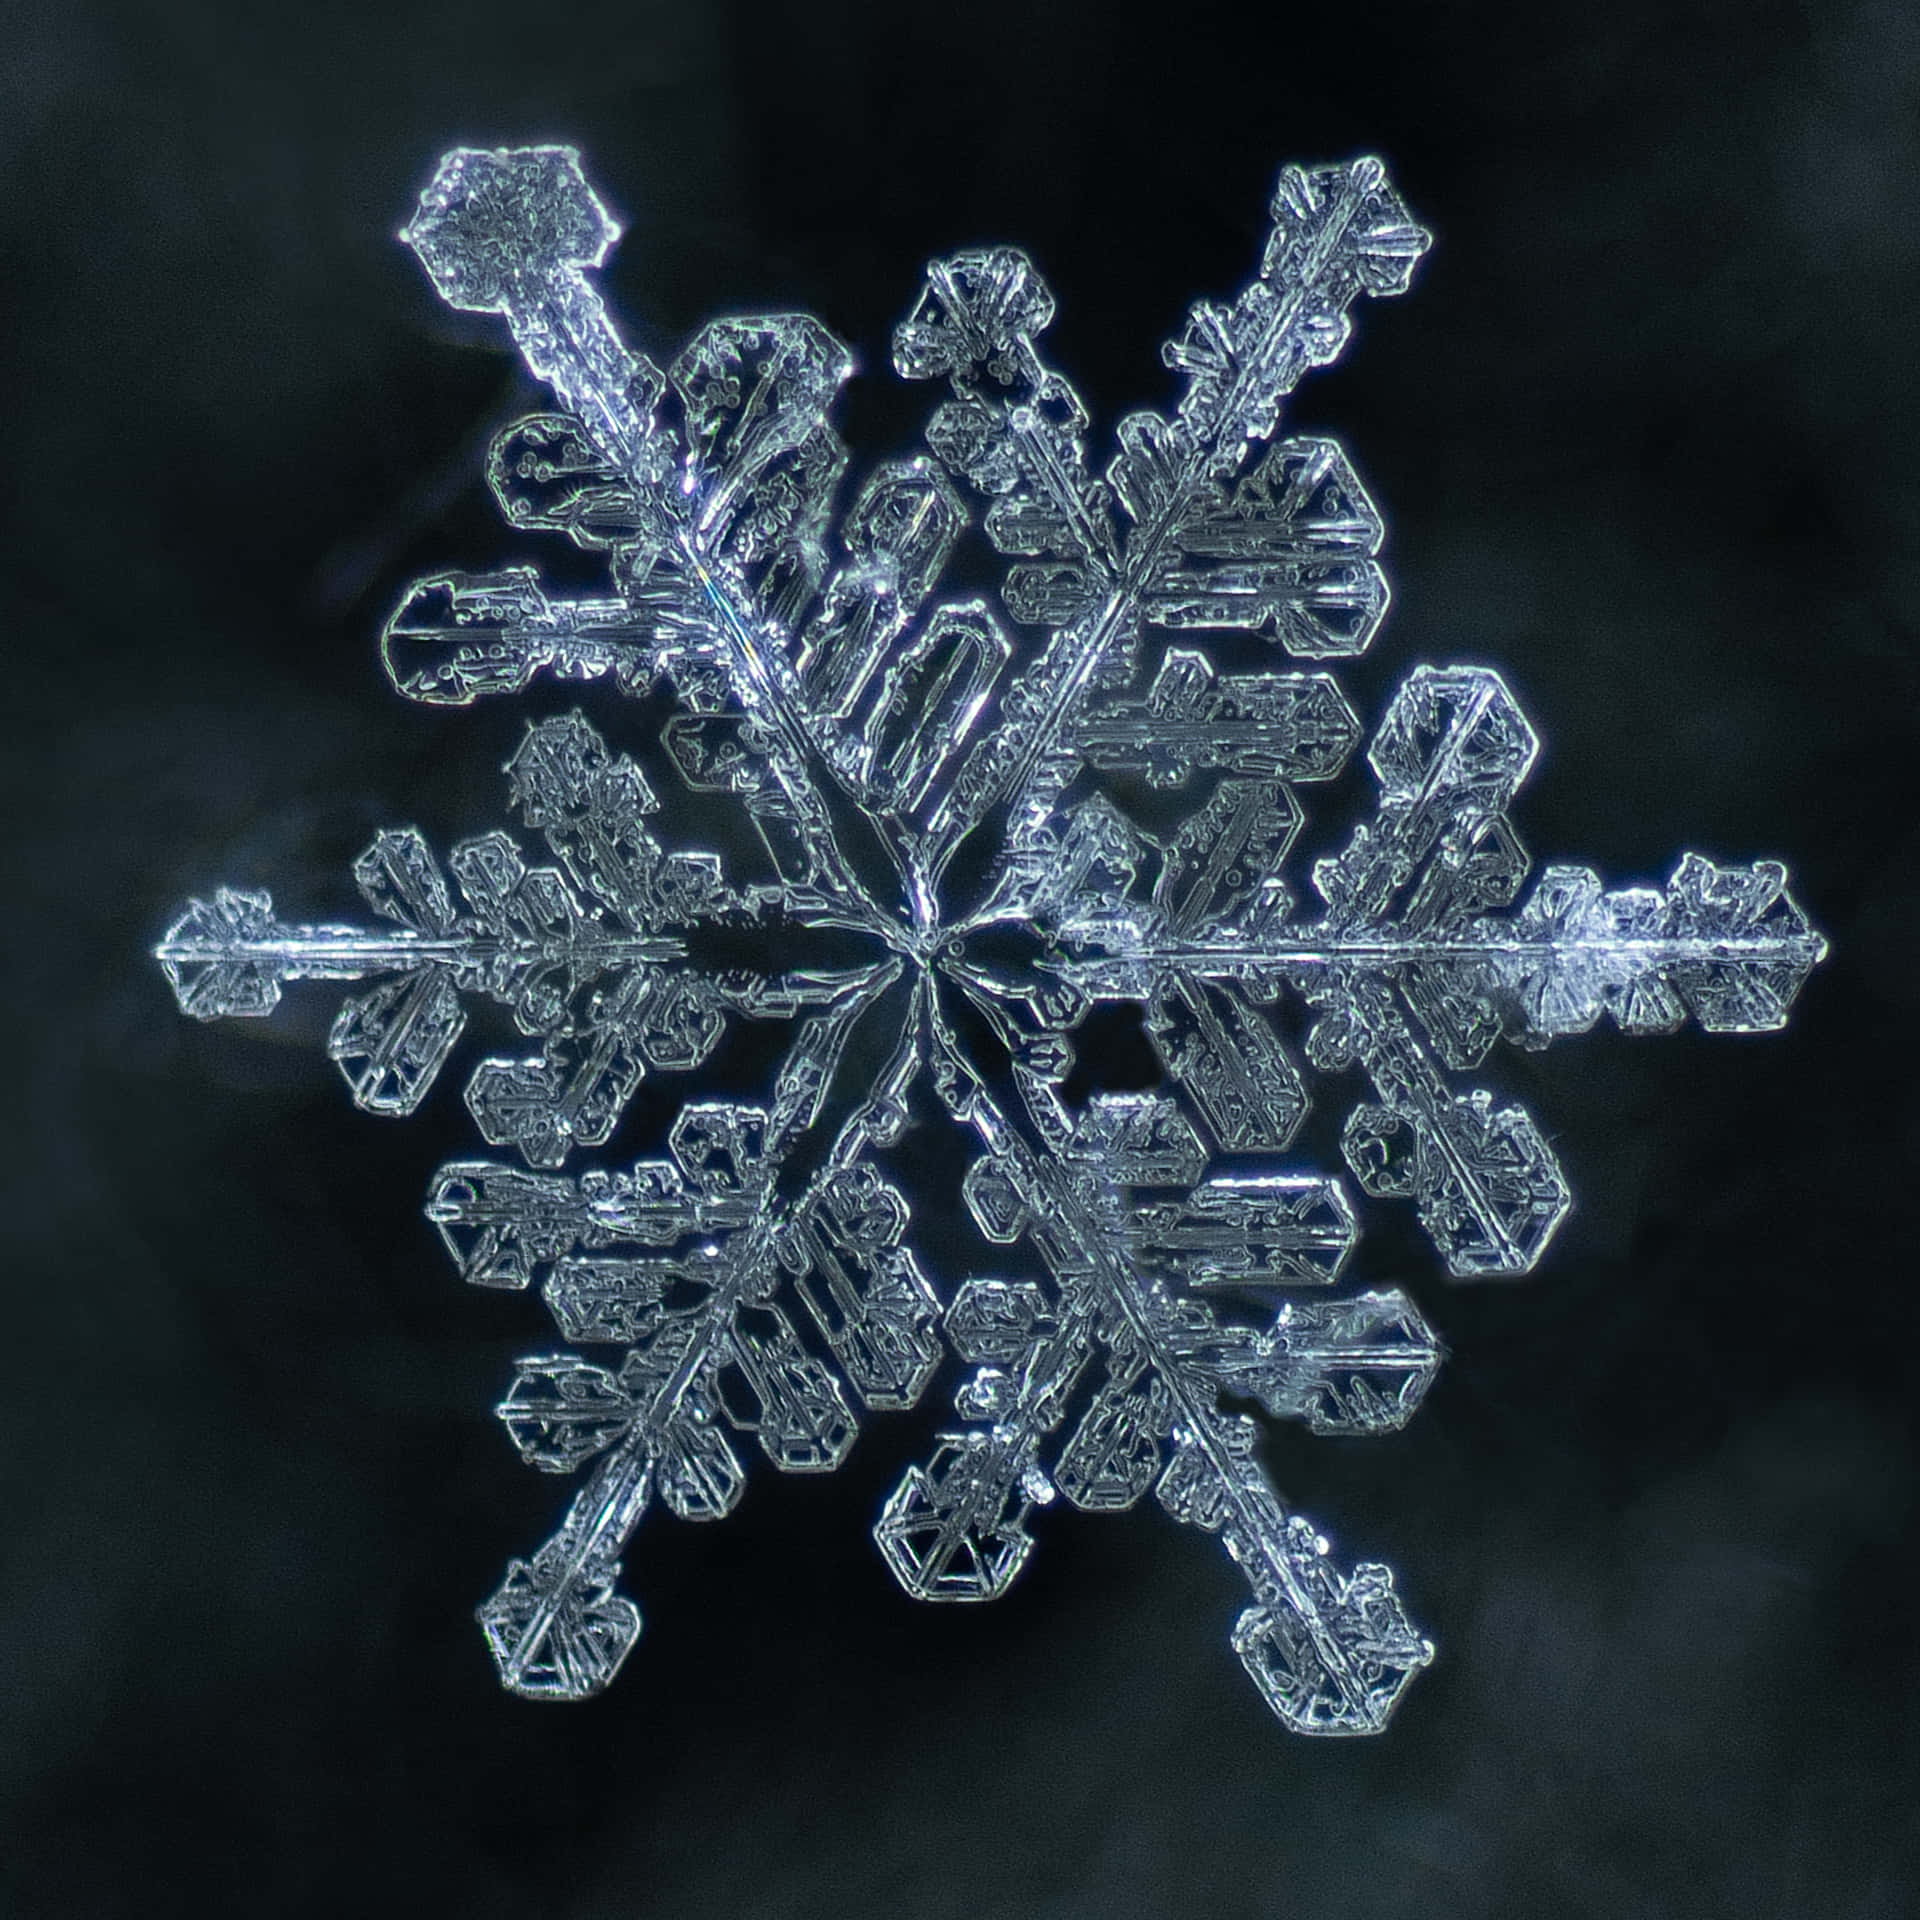 An intricate snowflake on a crisp winter day